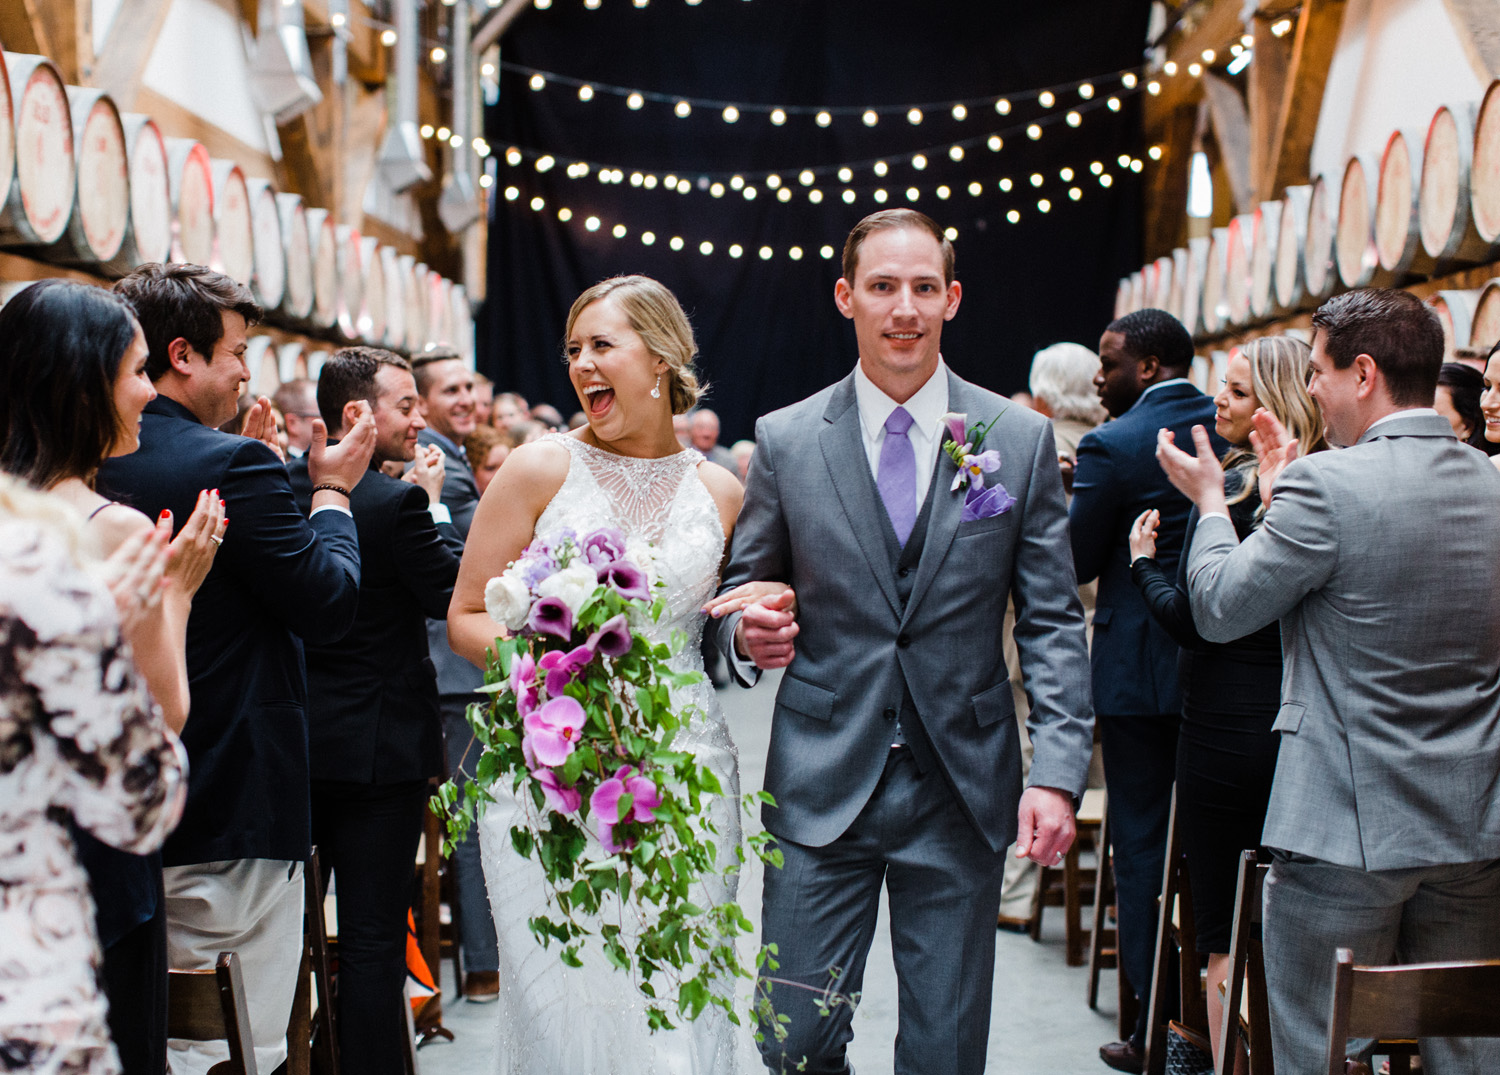 Couple After their ceremony at Westland Distillery Indoor Wedding Venue by Alexandra Knight Photography Seattle Wedding Photographer